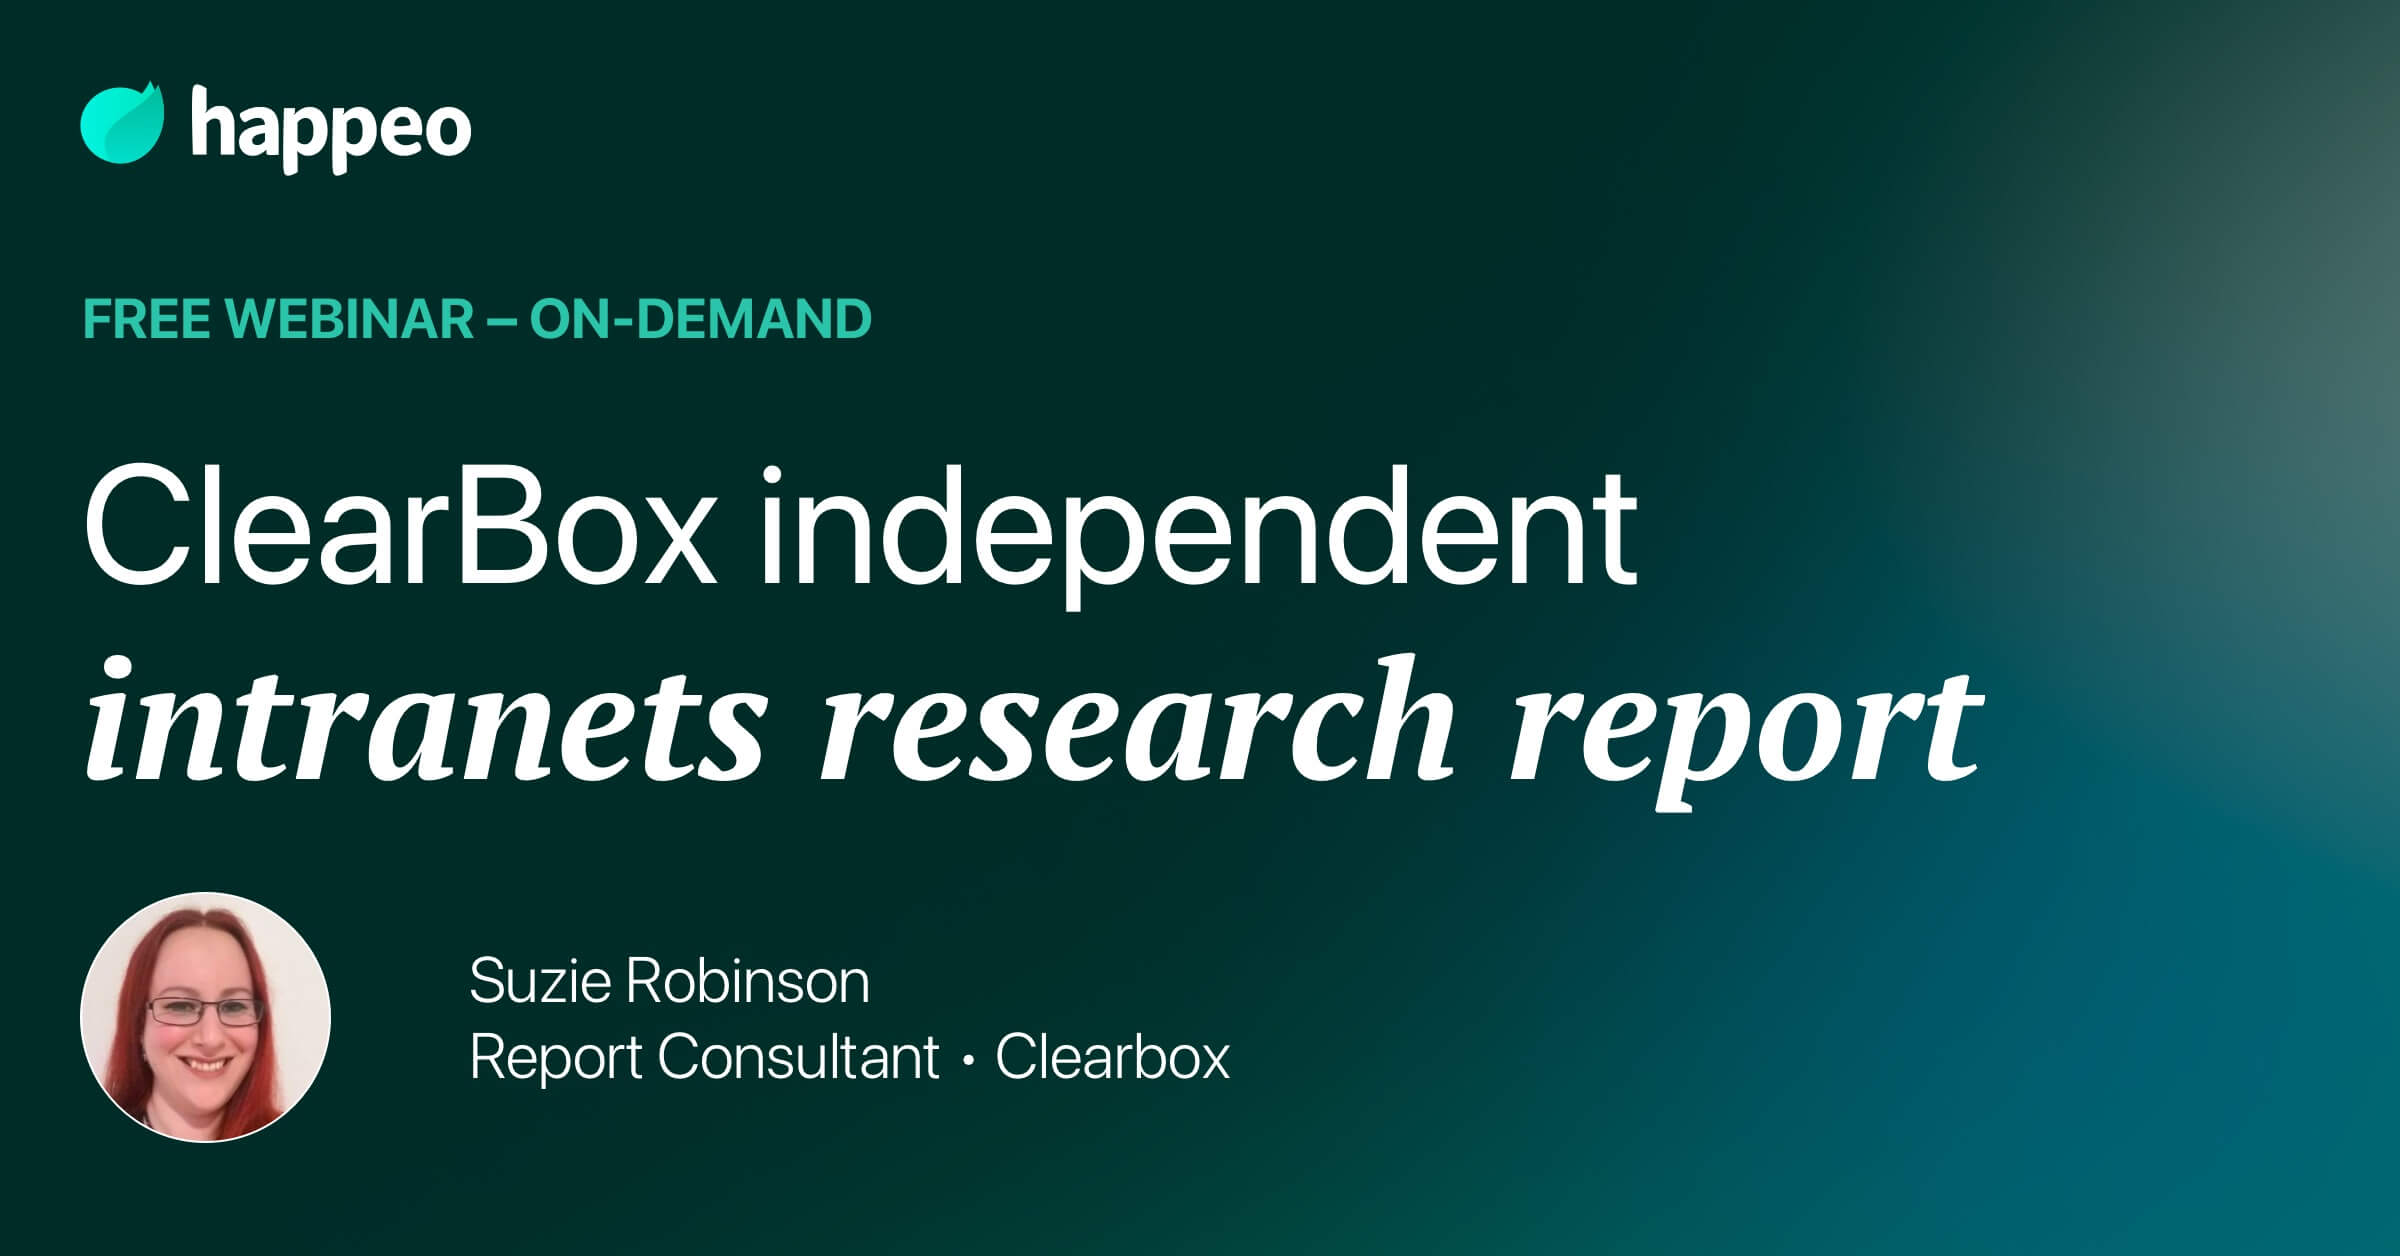 Clearbox independent intranets research report